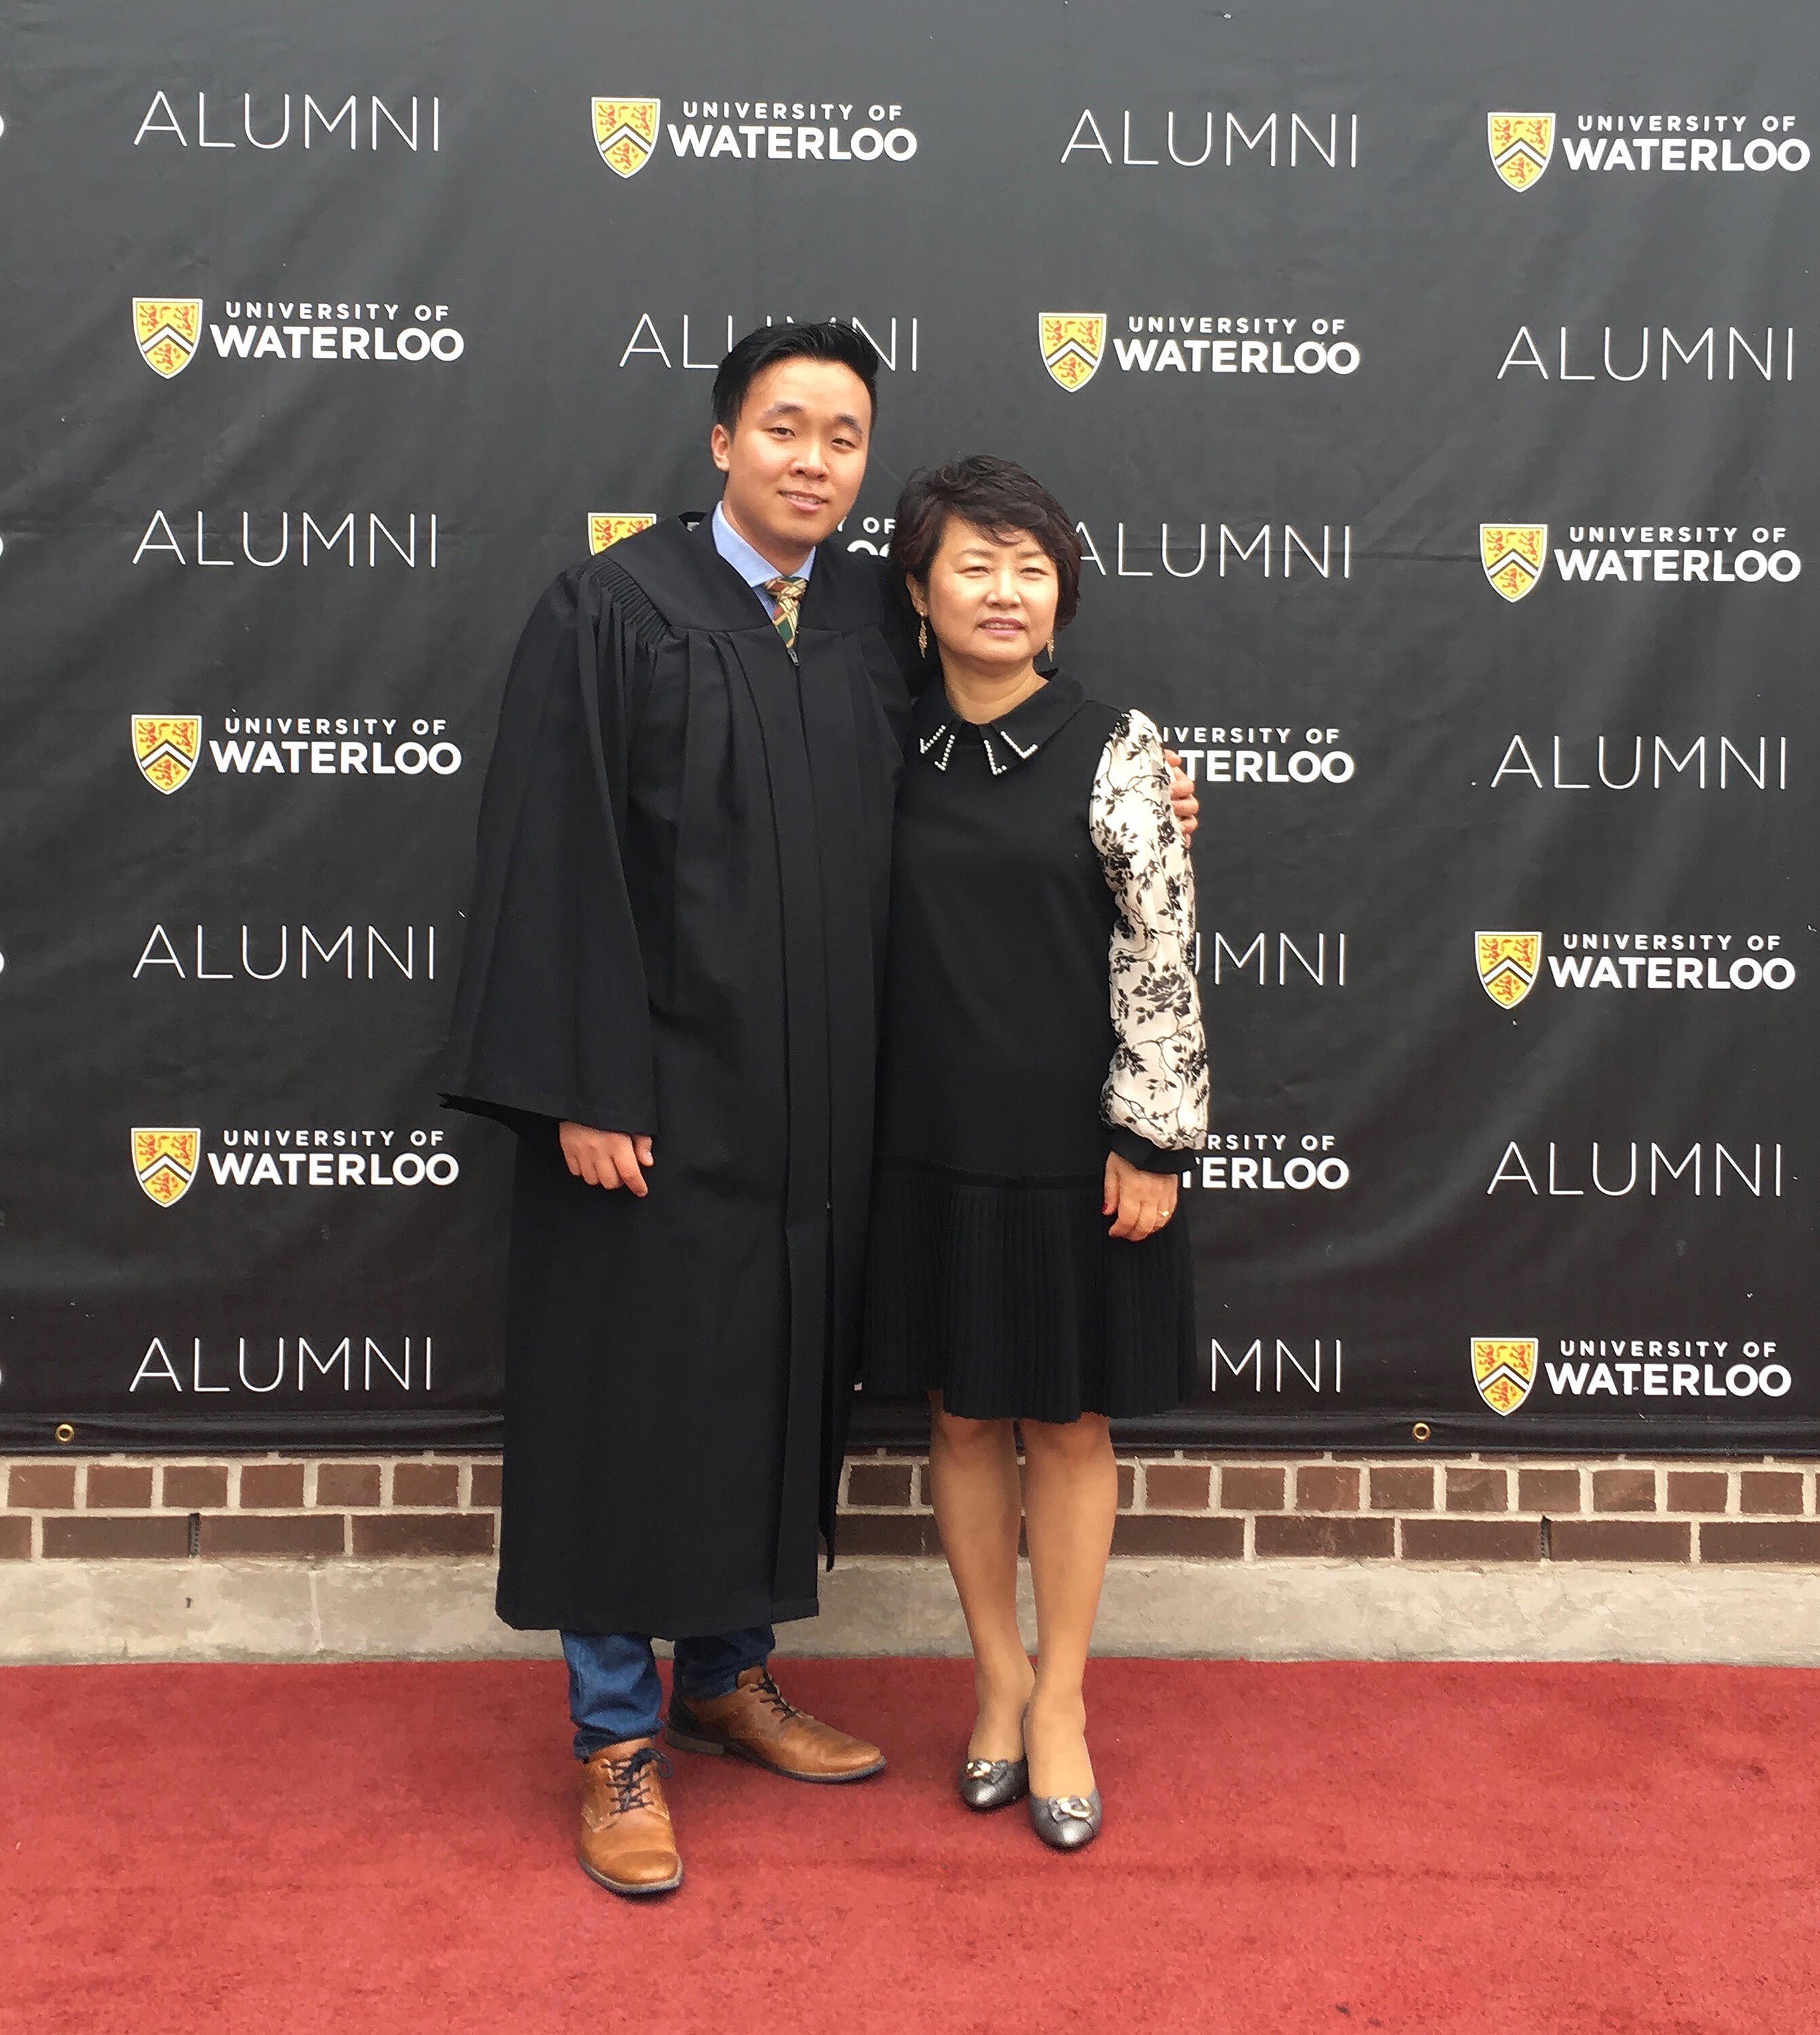 David and his mom posing in front of a banner at convocation